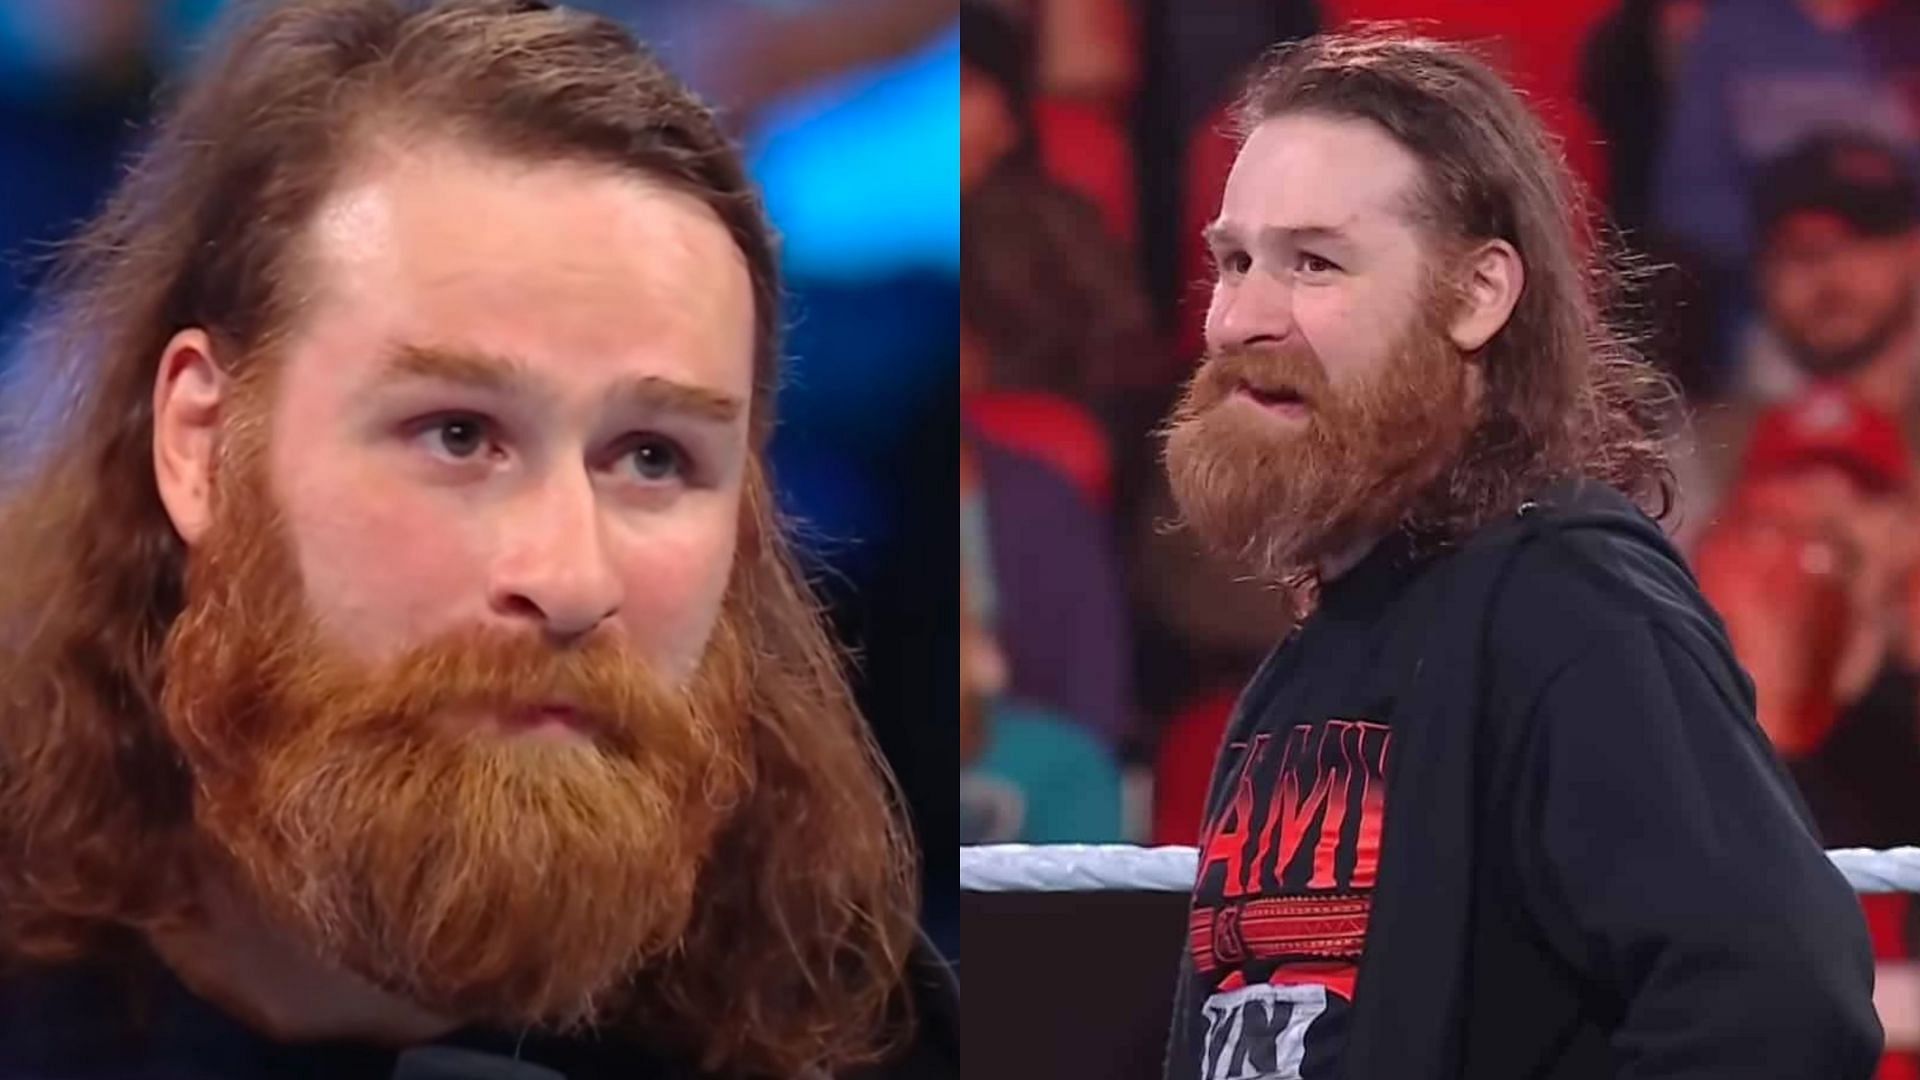 Sami Zayn is currently feuding with The Bloodline in WWE